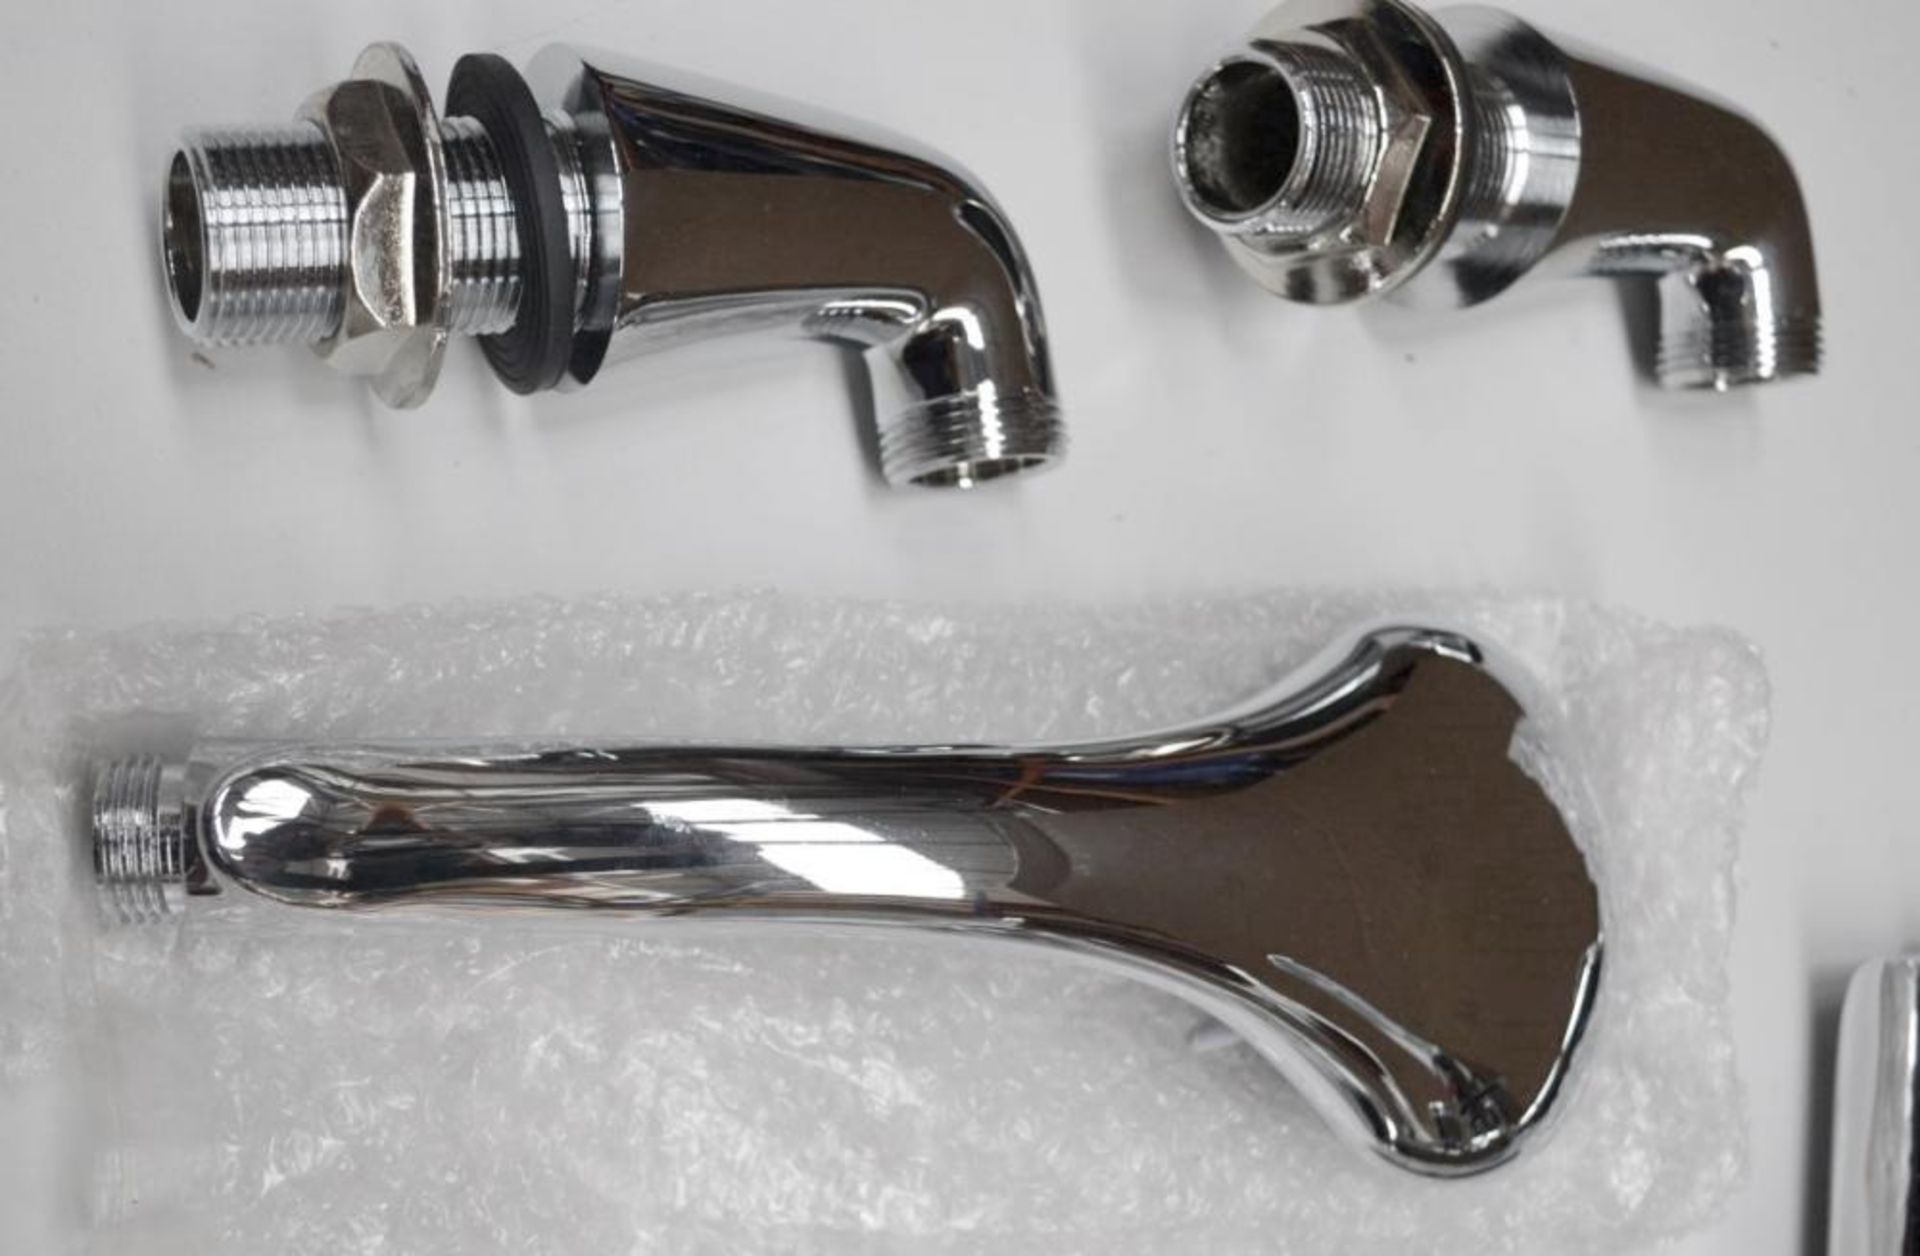 1 x PULSE Single Lever Bath Shower Mixer Tap In Chrome (Model: 112G2) - Ref: M188 - CL190 - Unused B - Image 2 of 7